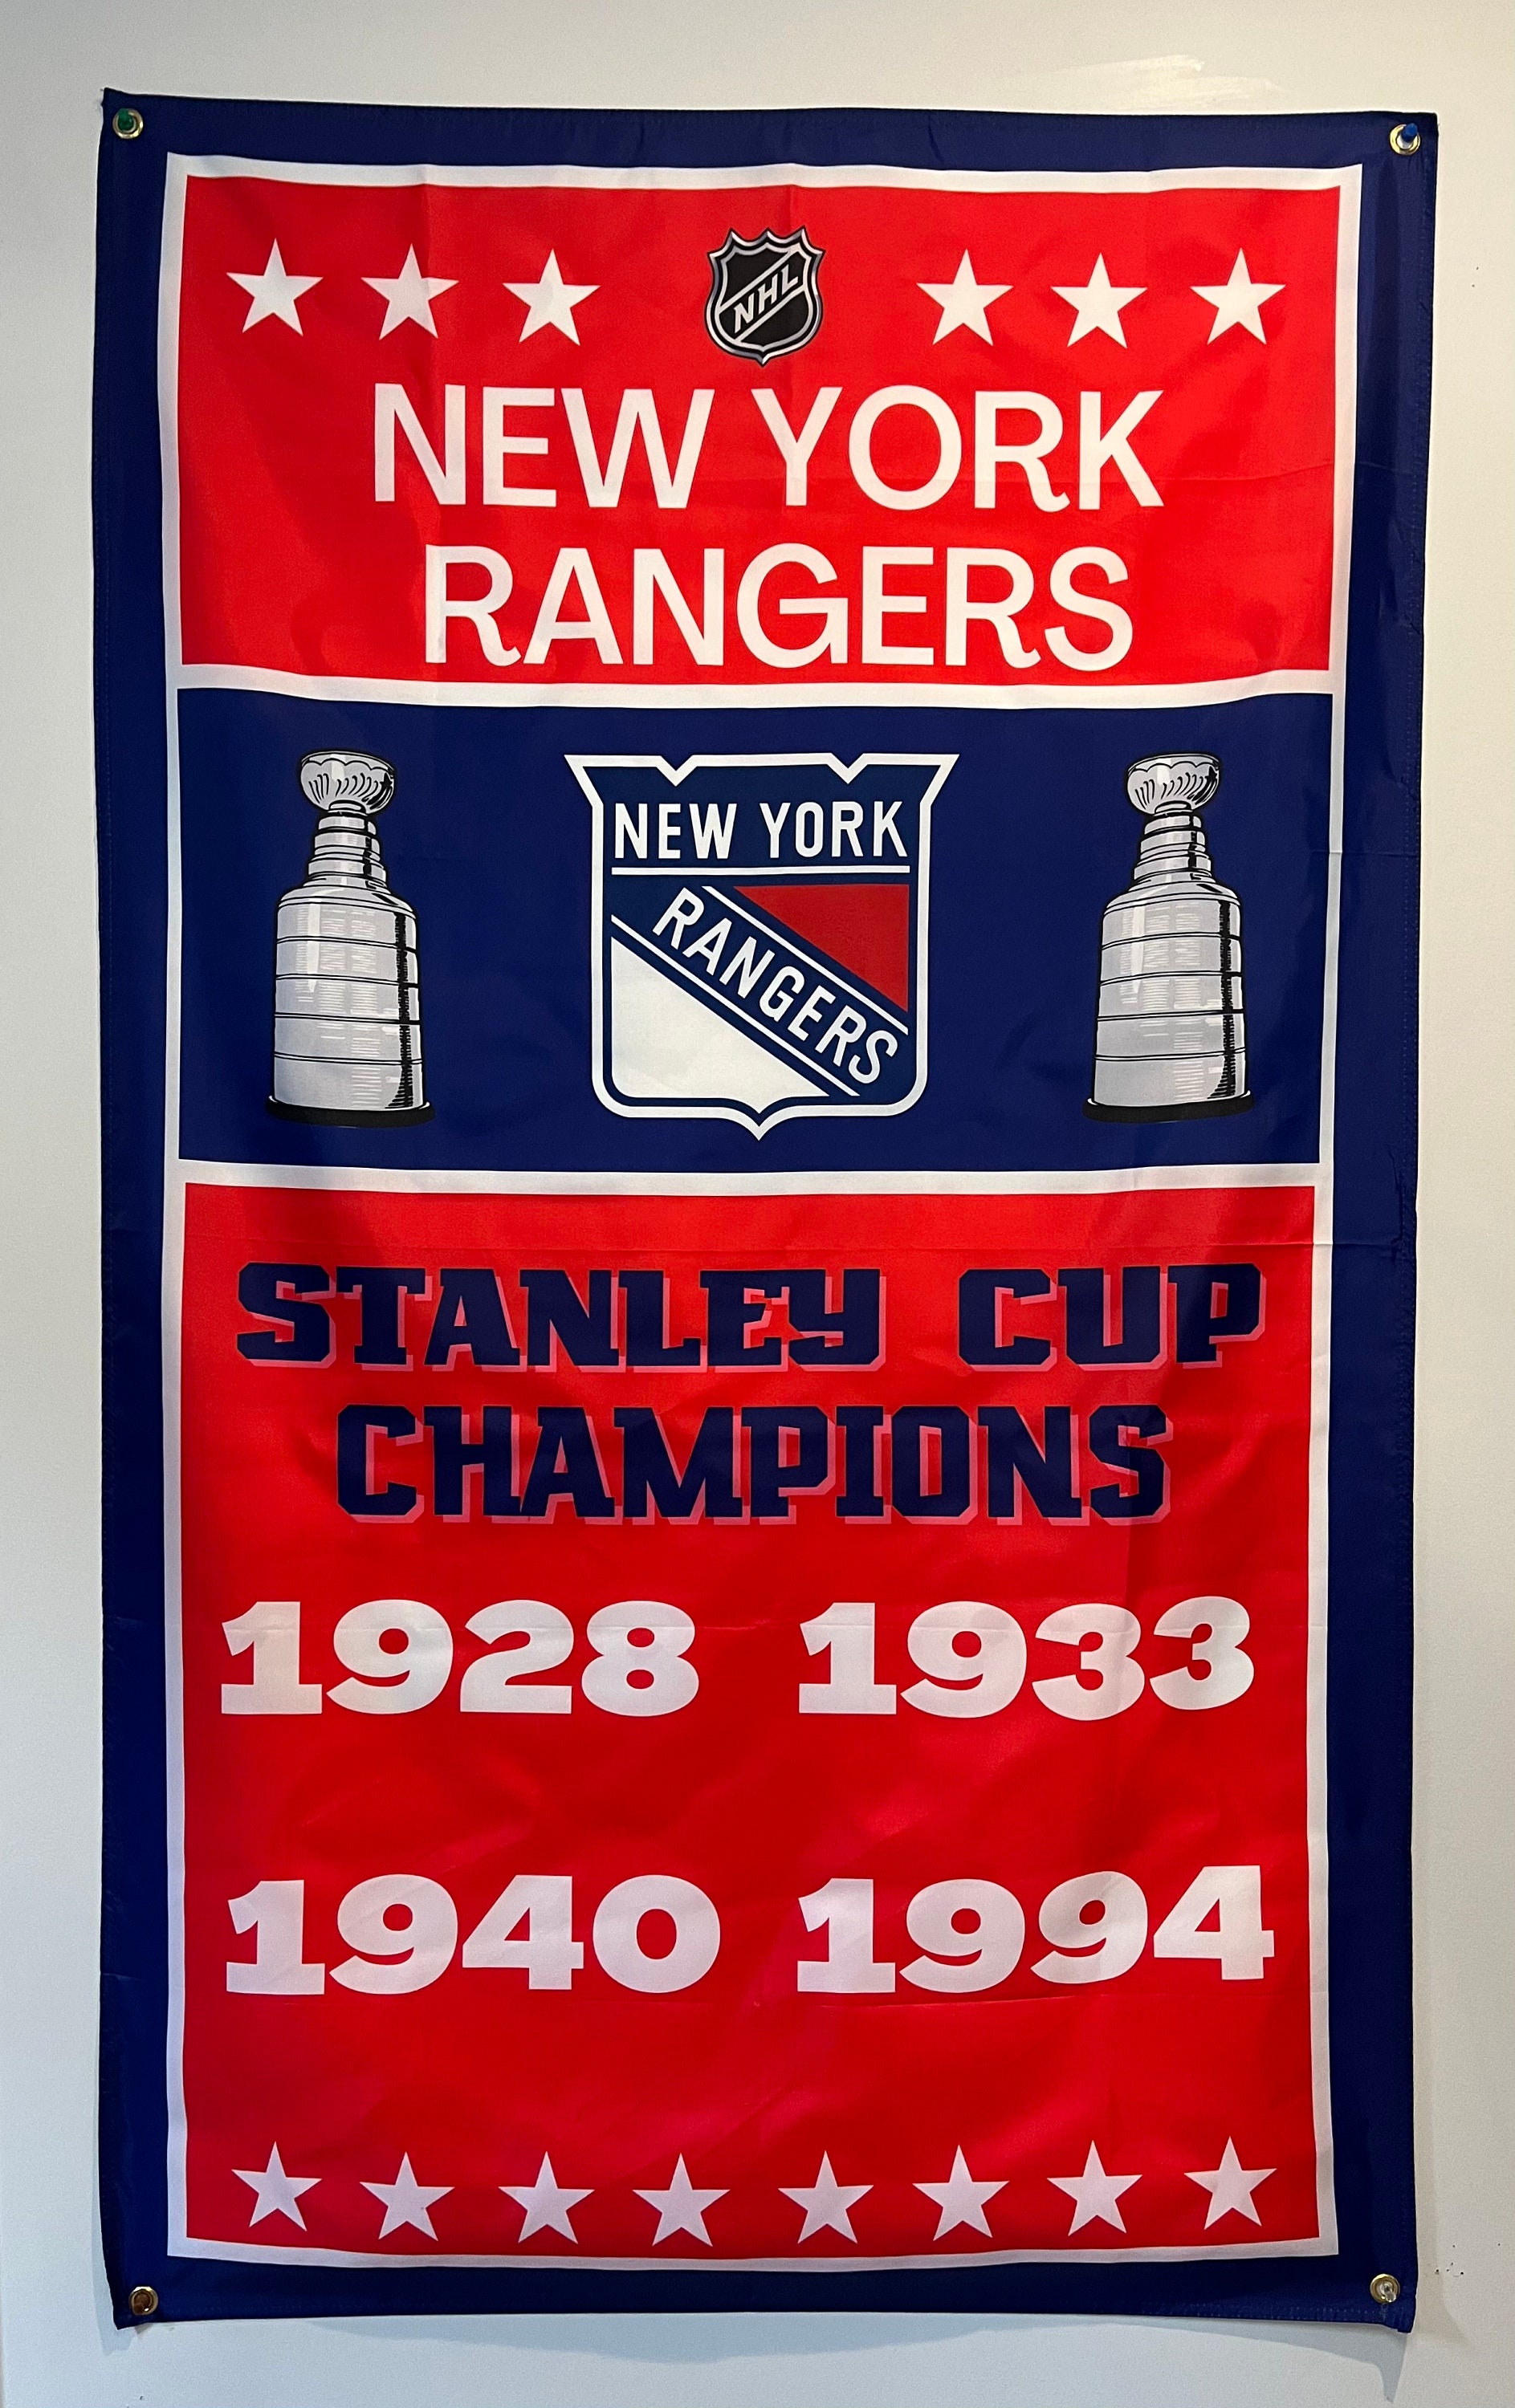 NEW YORK RANGERS VANCOUVER CANUCKS VINTAGE 1994 STANLEY CUP FINALS #1 -  Bucks County Baseball Co.